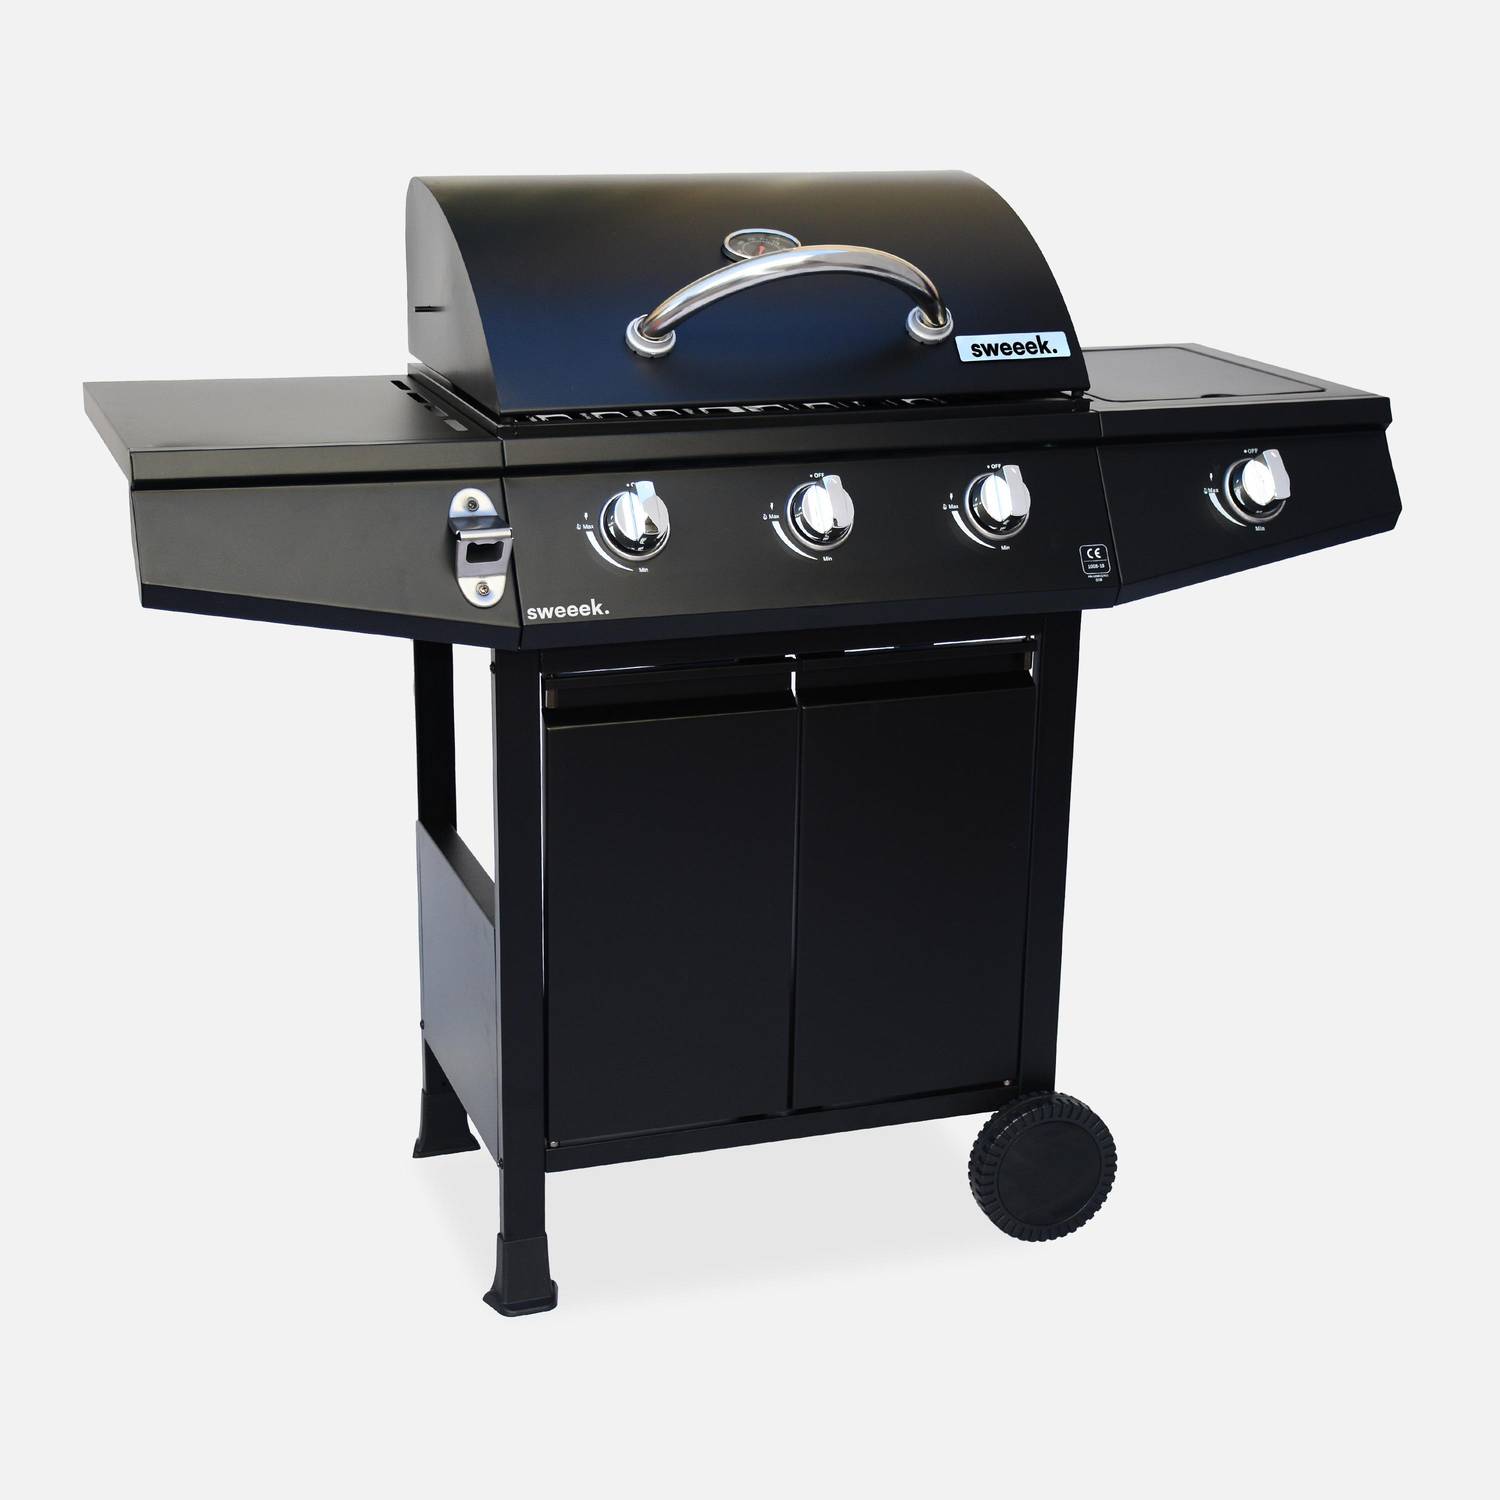 Gas barbecue - Treville - Barbecue 3 burners + 1 black side burner, with thermometer Photo1